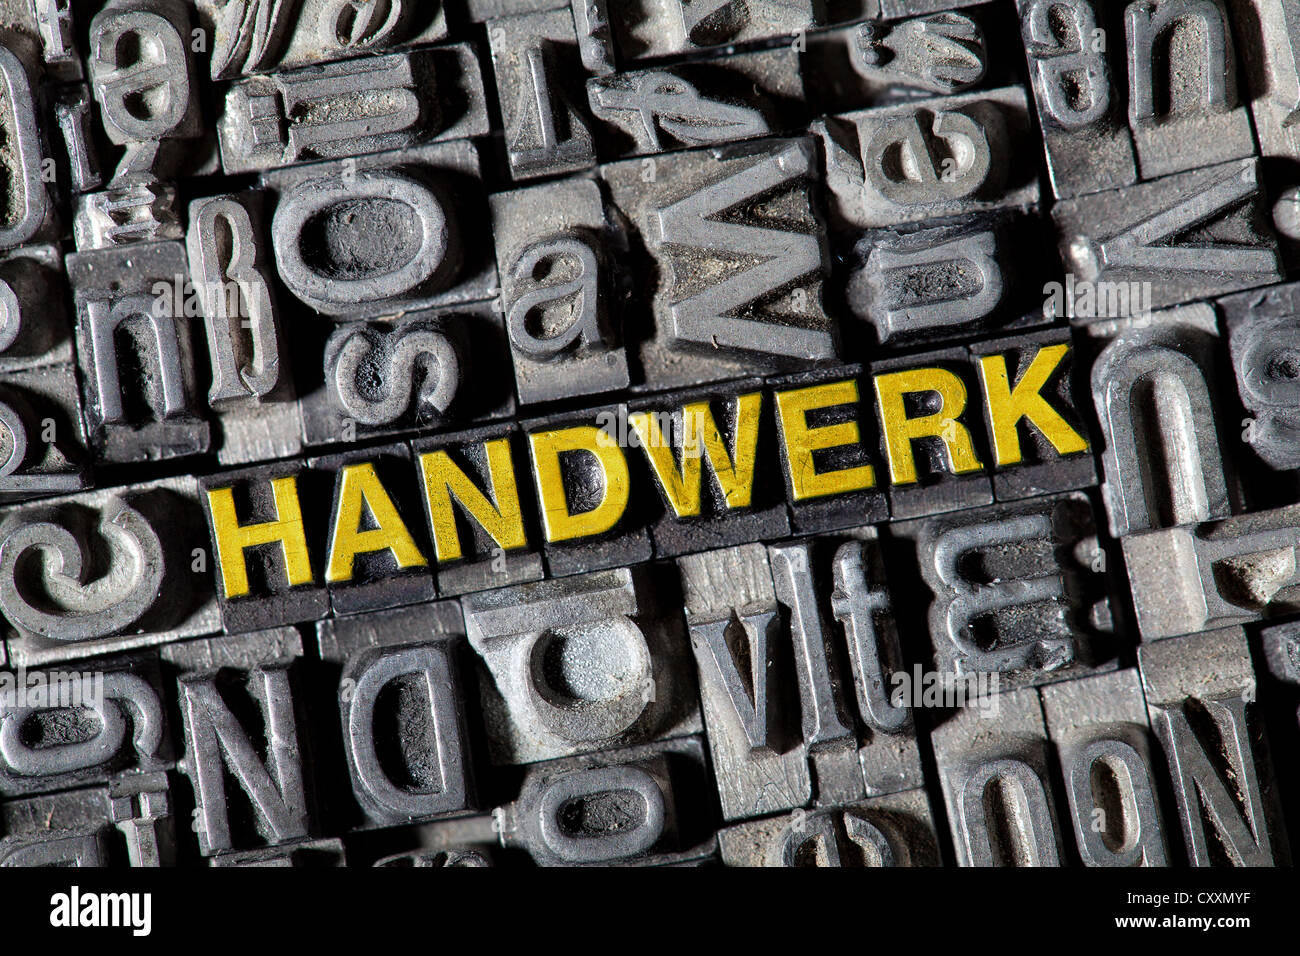 Old letters forming the word Handwerk, German for craft Stock Photo